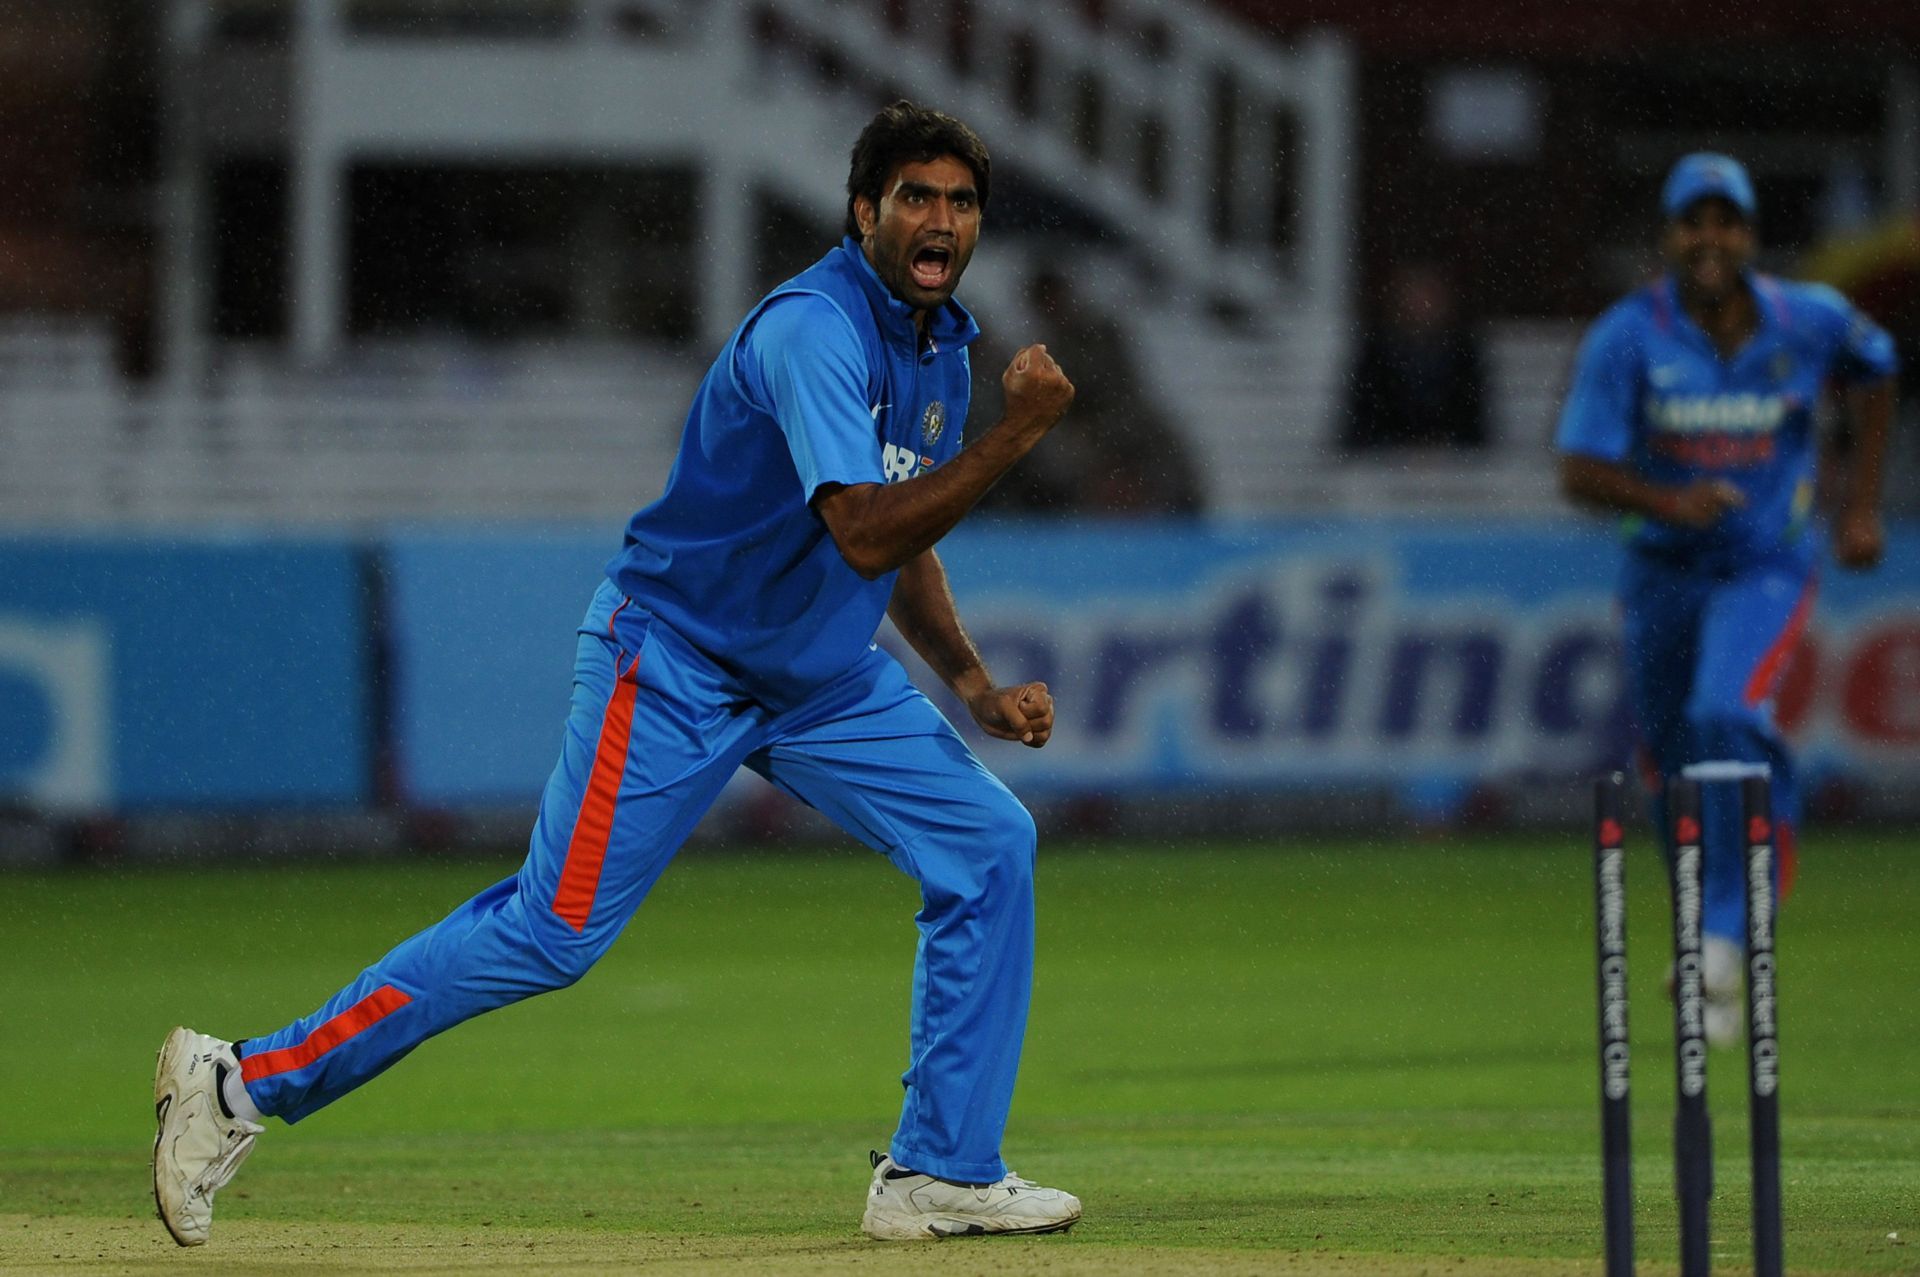 Munaf Patel also had the opportunity to play under Shane Warne